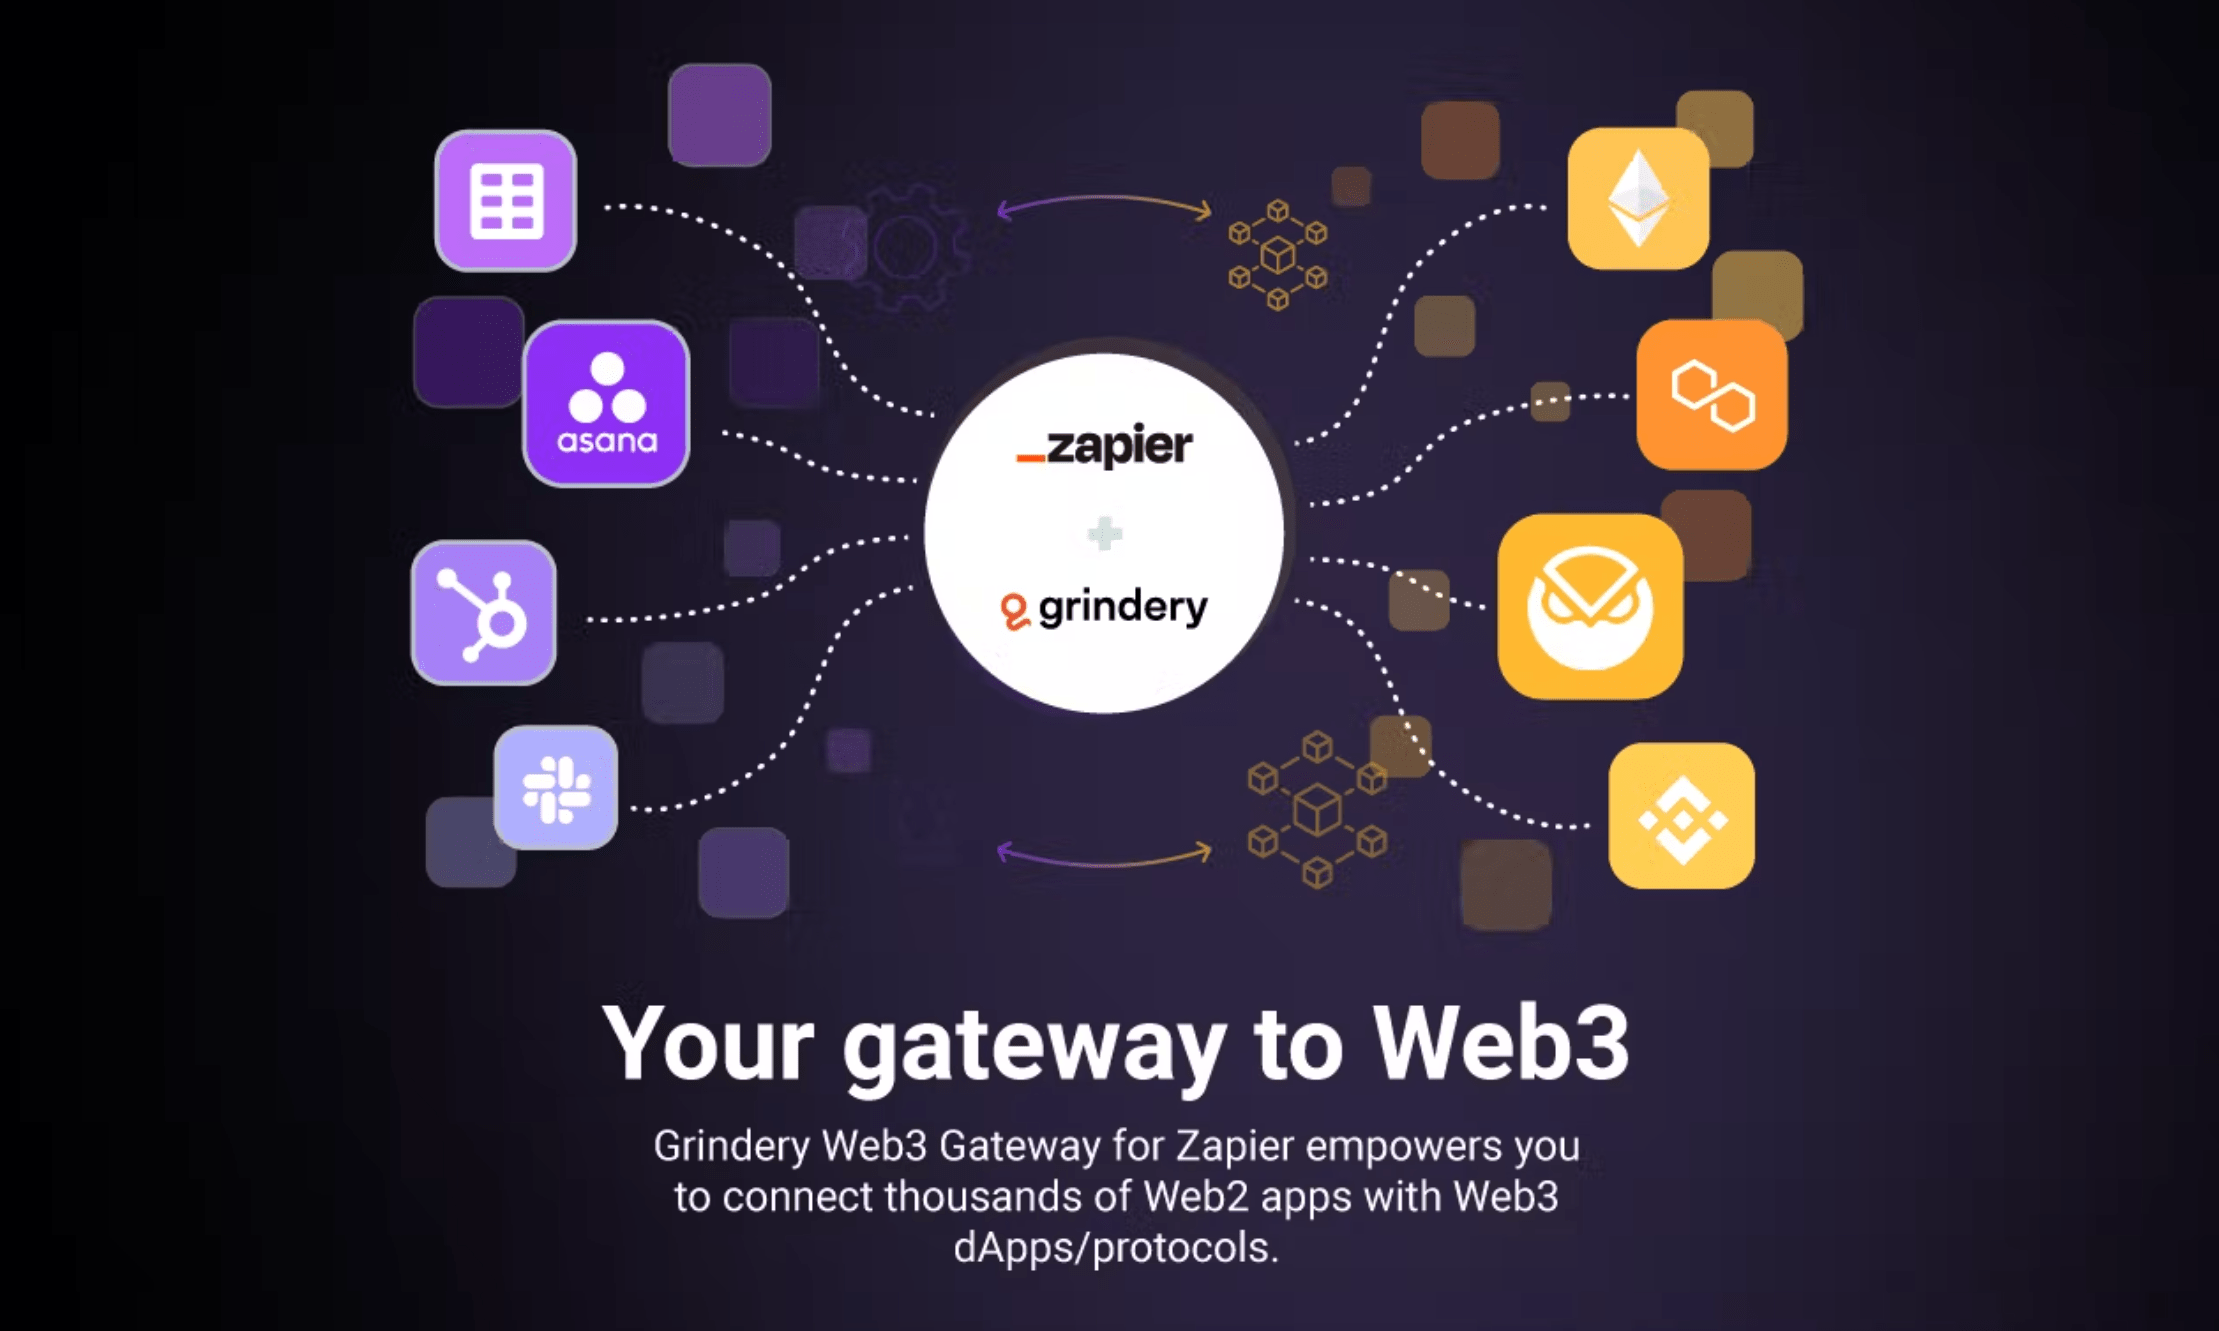 Press Release: Grindery Gateway for Zapier launches, a no-code solution to connect Web2 with Web3